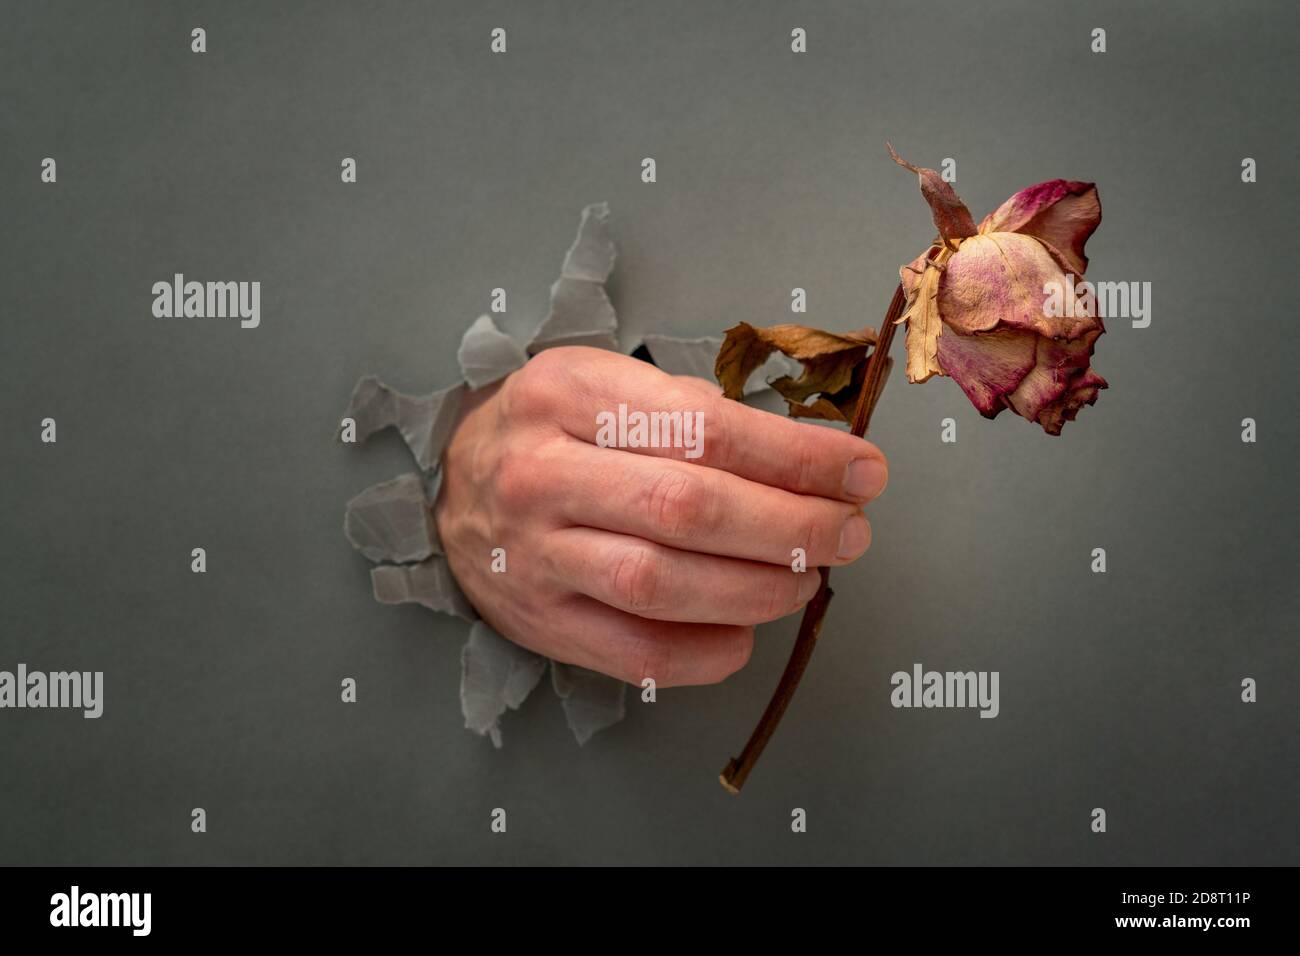 Hand with a faded rose through a grey paper hole.Concept of a broken heart, breakup, divorce. Stock Photo